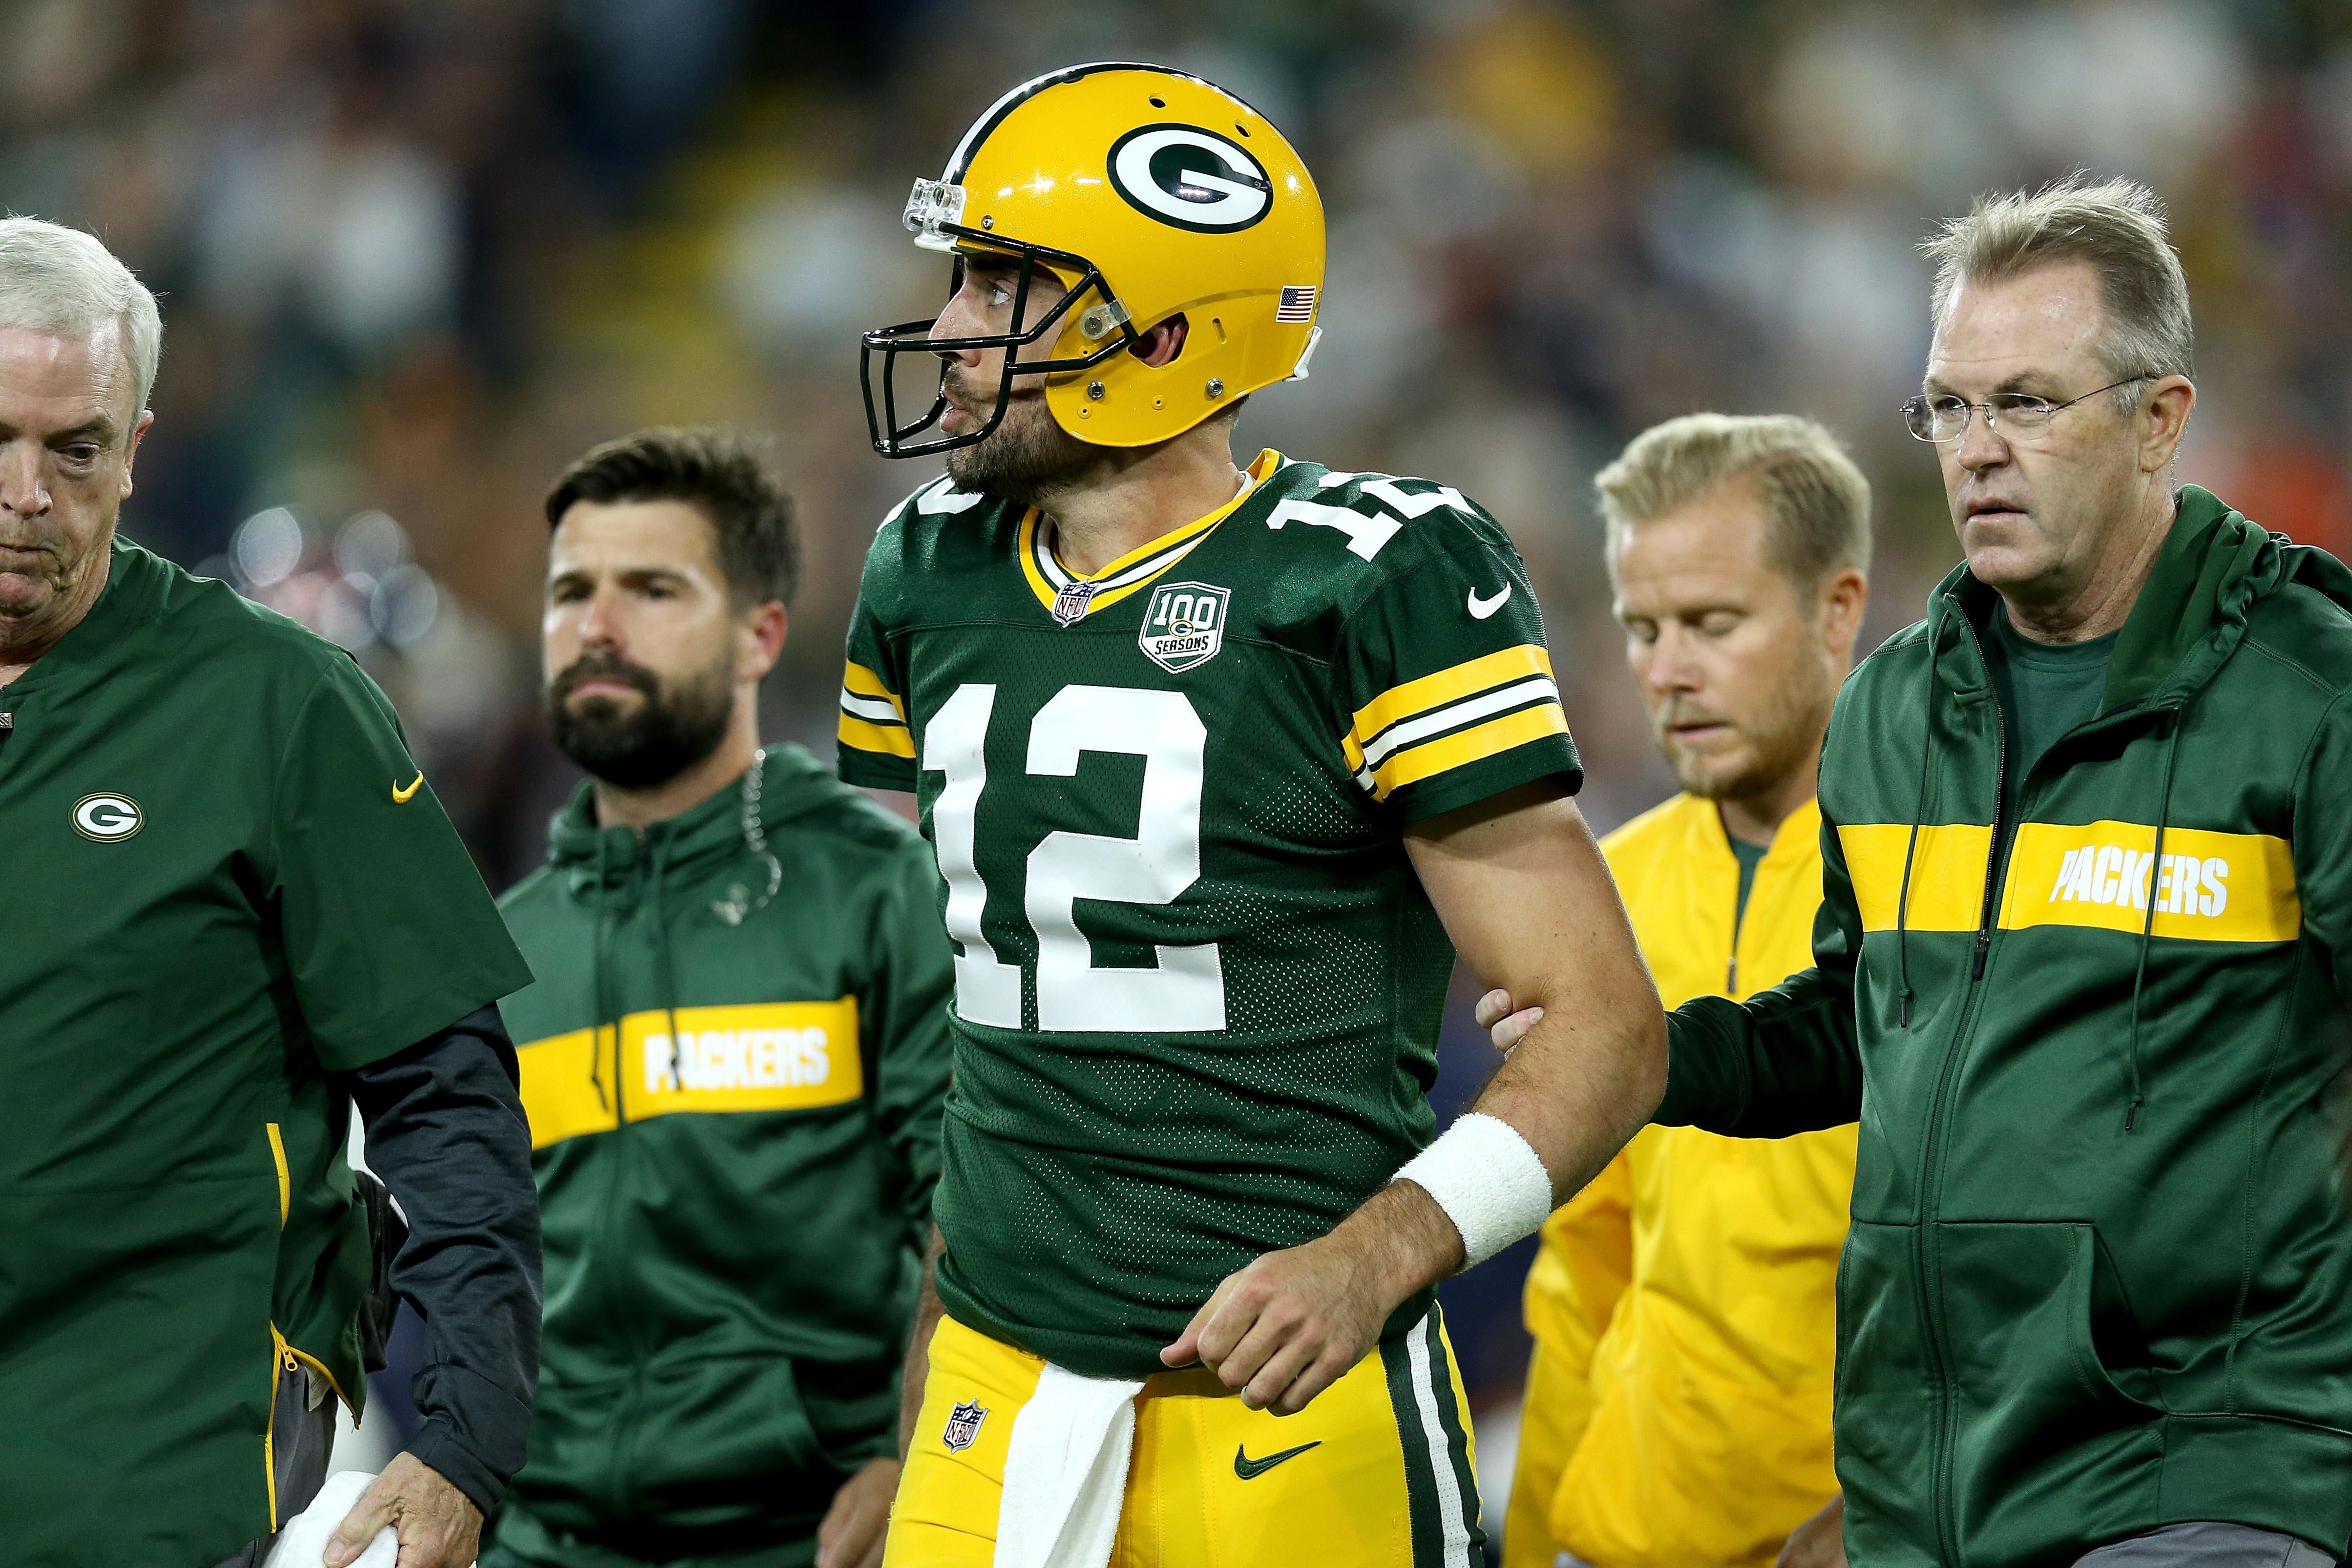 GREEN BAY, WI - SEPTEMBER 09:  Aaron Rodgers #12 of the Green Bay Packers is helped off the field after injuring his leg in the second quarter of a game against the Chicago Bears at Lambeau Field on September 9, 2018 in Green Bay, Wisconsin.  (Photo by Dylan Buell/Getty Images)